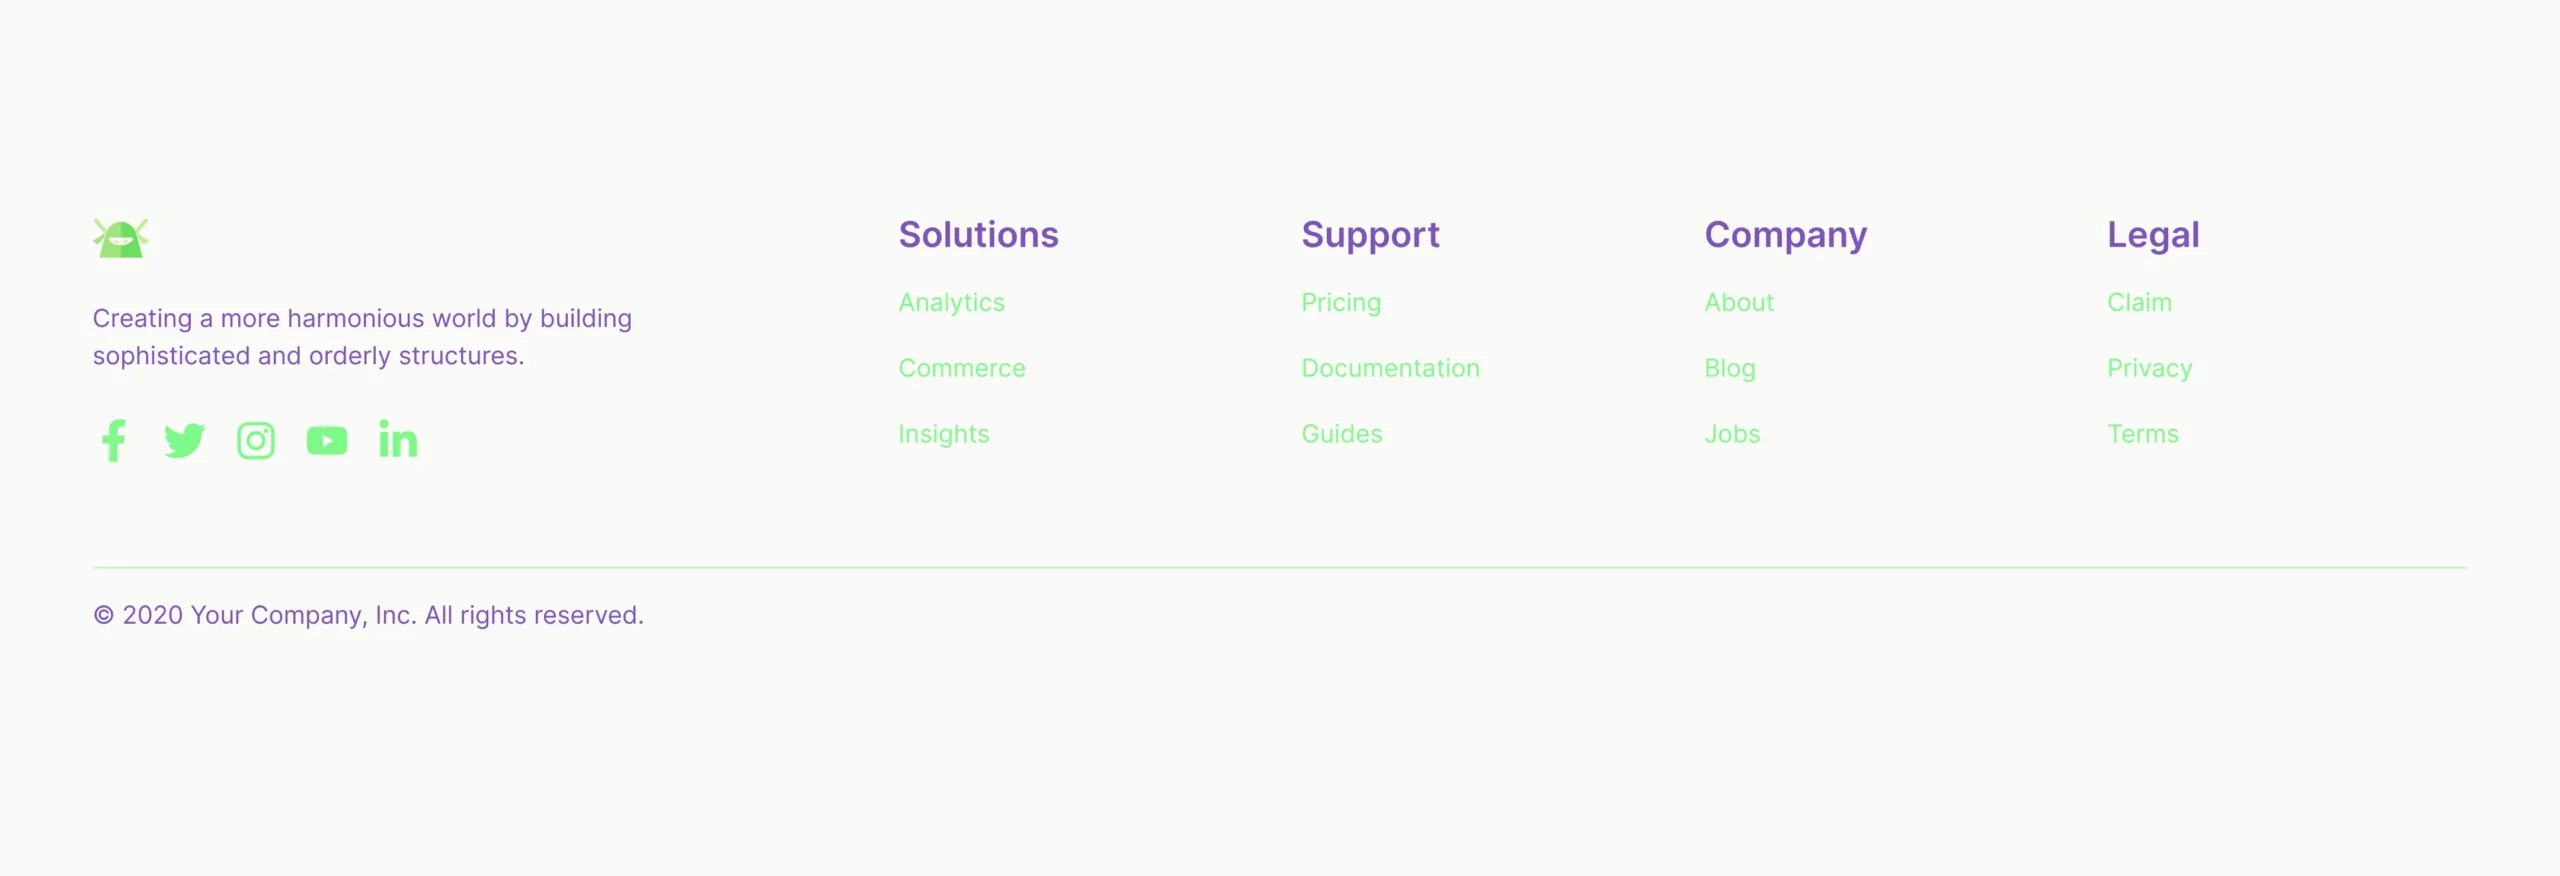 4-column with company mission Bootstrap 5 components